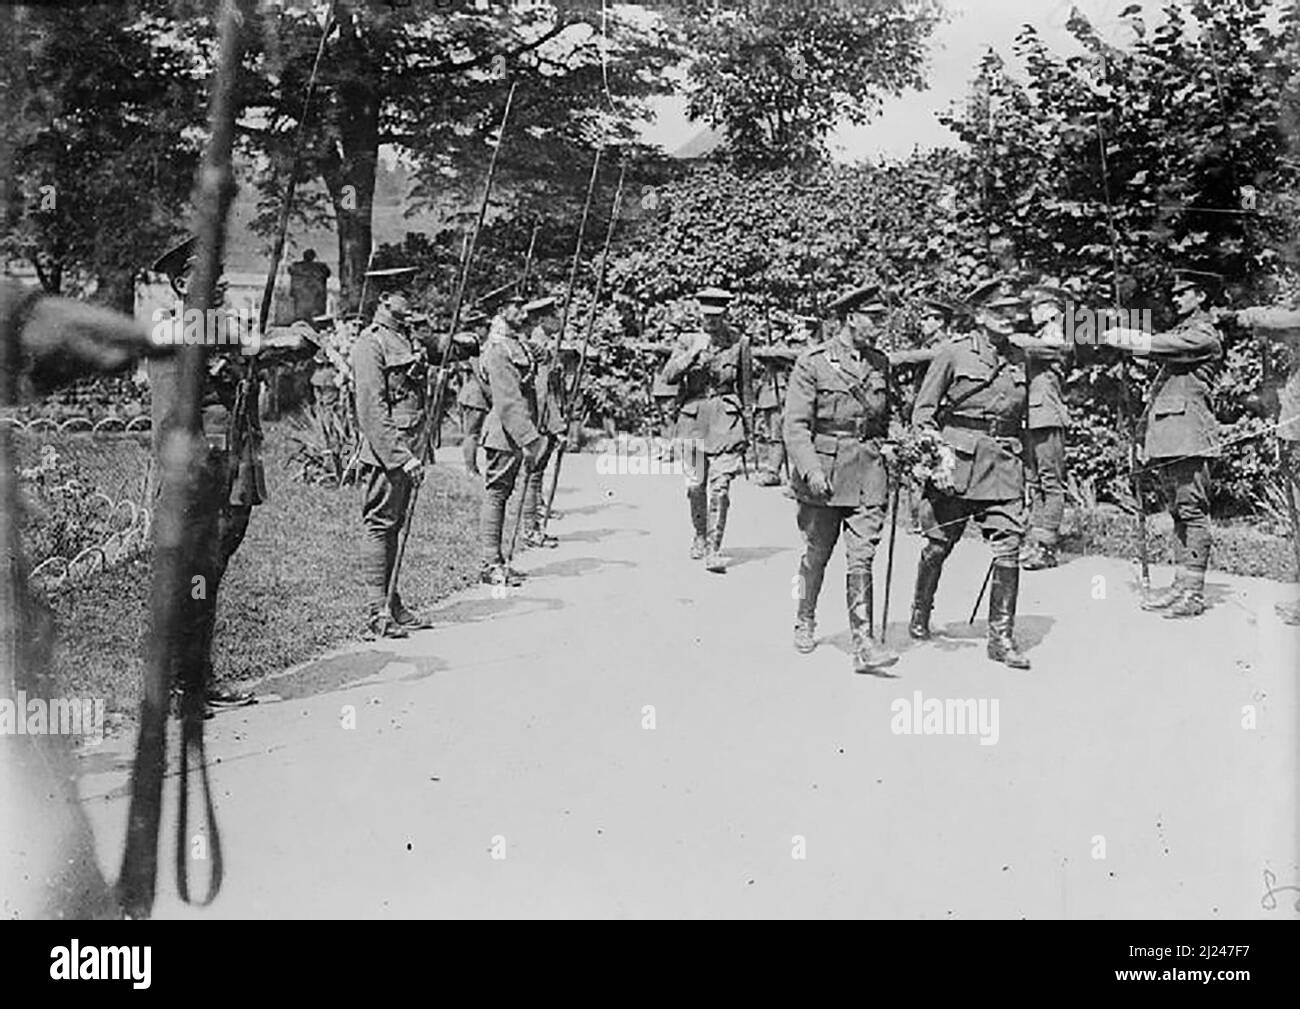 H.M. the King with Sir Douglas Haig, arriving at the Commander-in-Chief's Chateau (Advanced GHQ) at Beauquesne, 8th August 1916. Guard of Honour from 17th Lancers under Captain Black Stock Photo